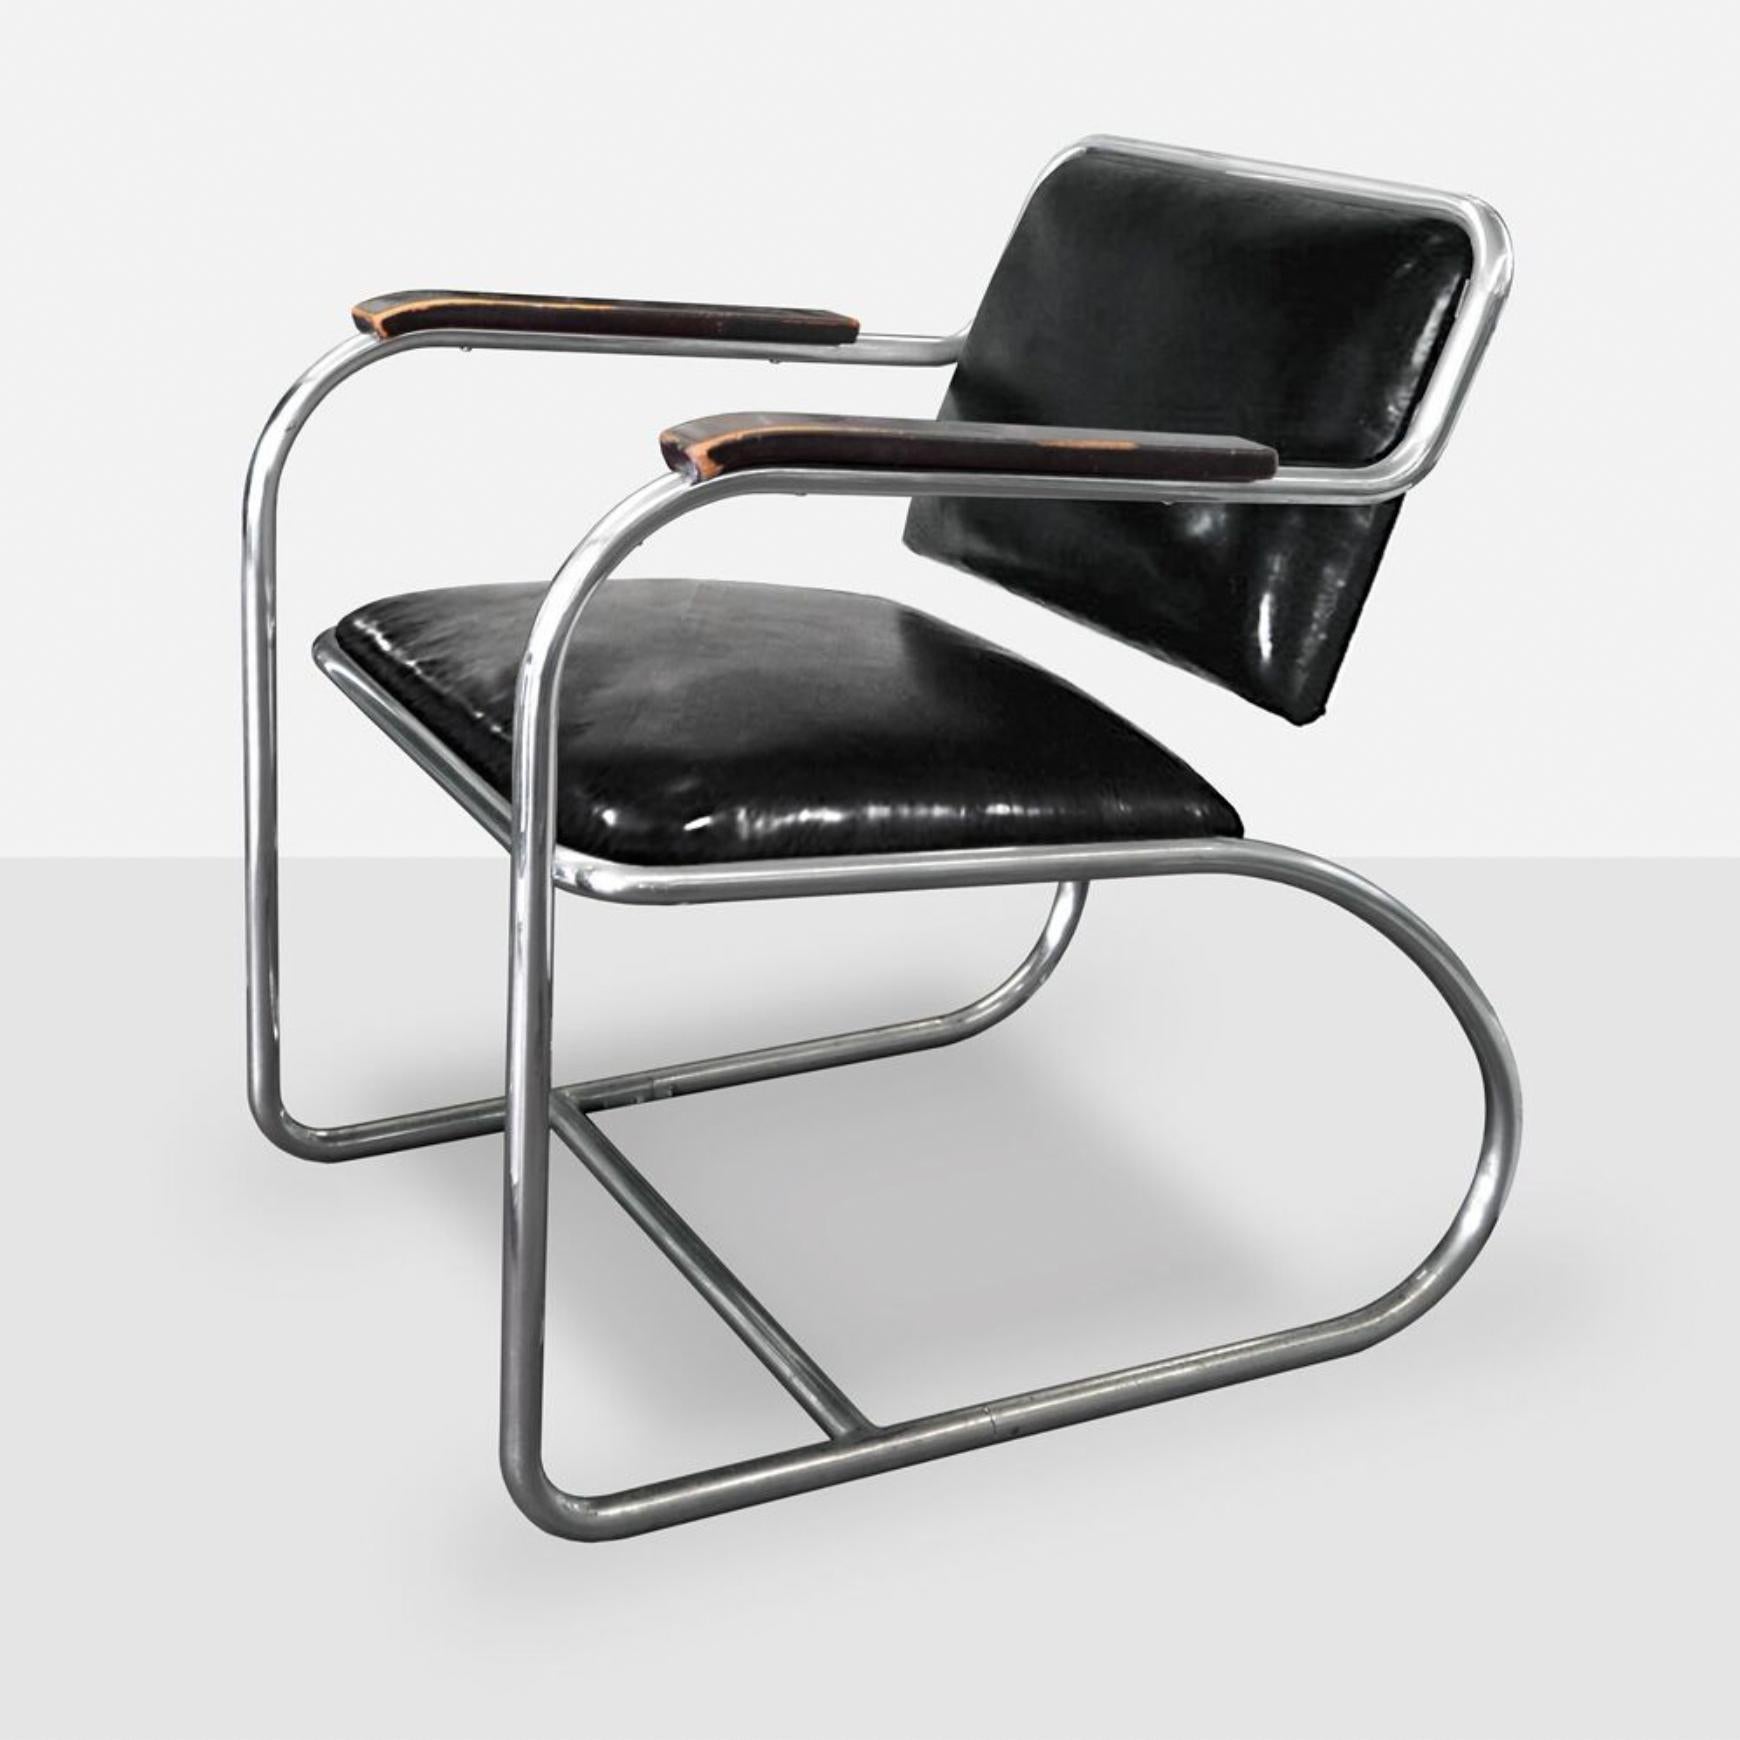 Bauhaus tubular steel armchair, model RS 4, designed by Heinz and Bodo Rasch and manufactured by Mauser Werke, Waldeck, Germany, around 1936. 
A rare and important design in exquisite condition.